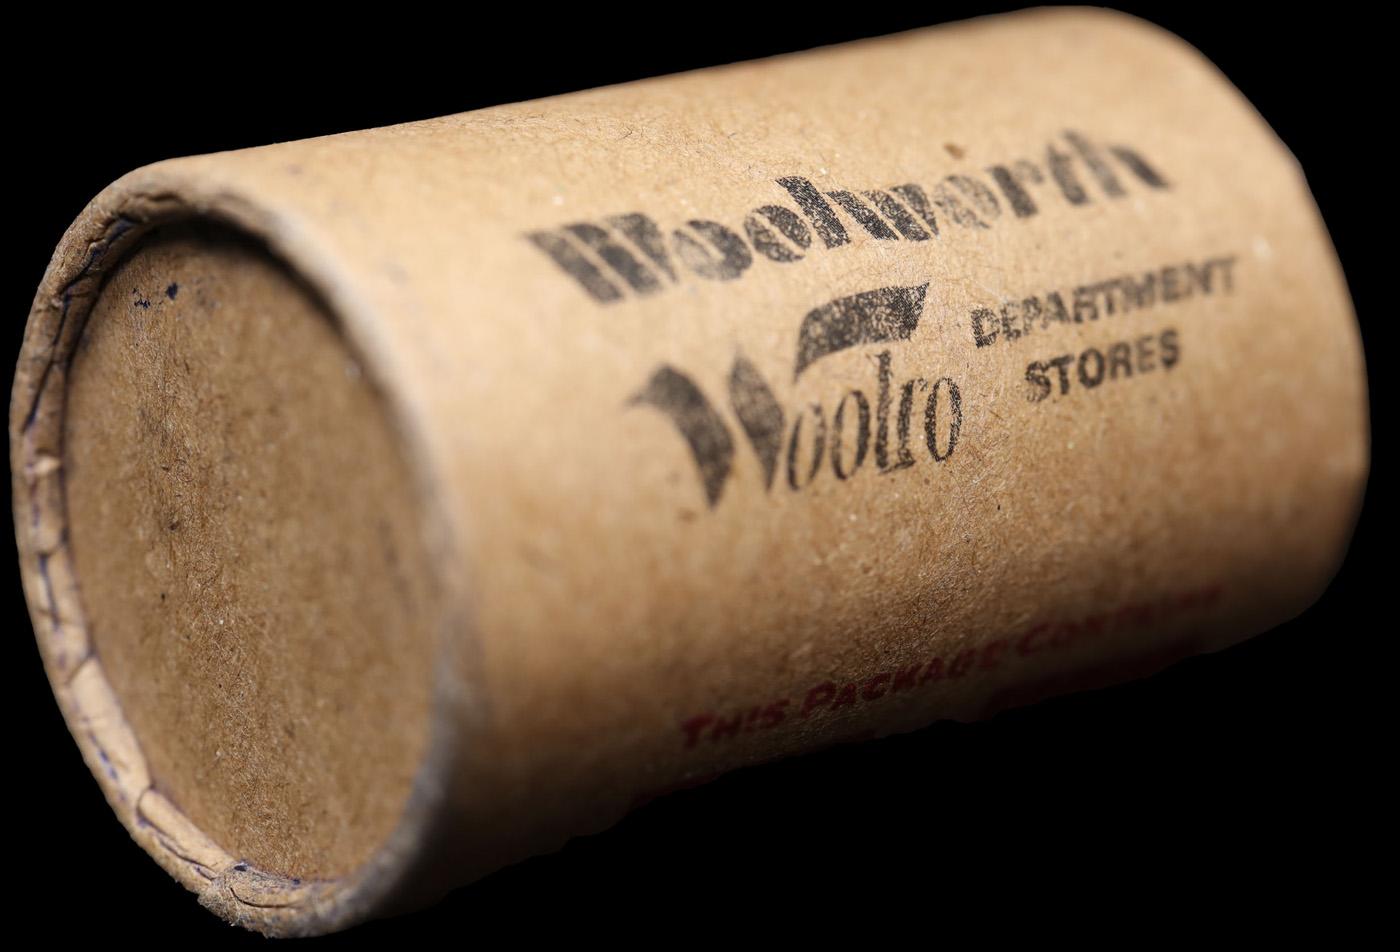 *Uncovered Hoard* - Covered End Roll - Marked "Morgan/Peace Premium" - Weight shows x20 Coins (FC)